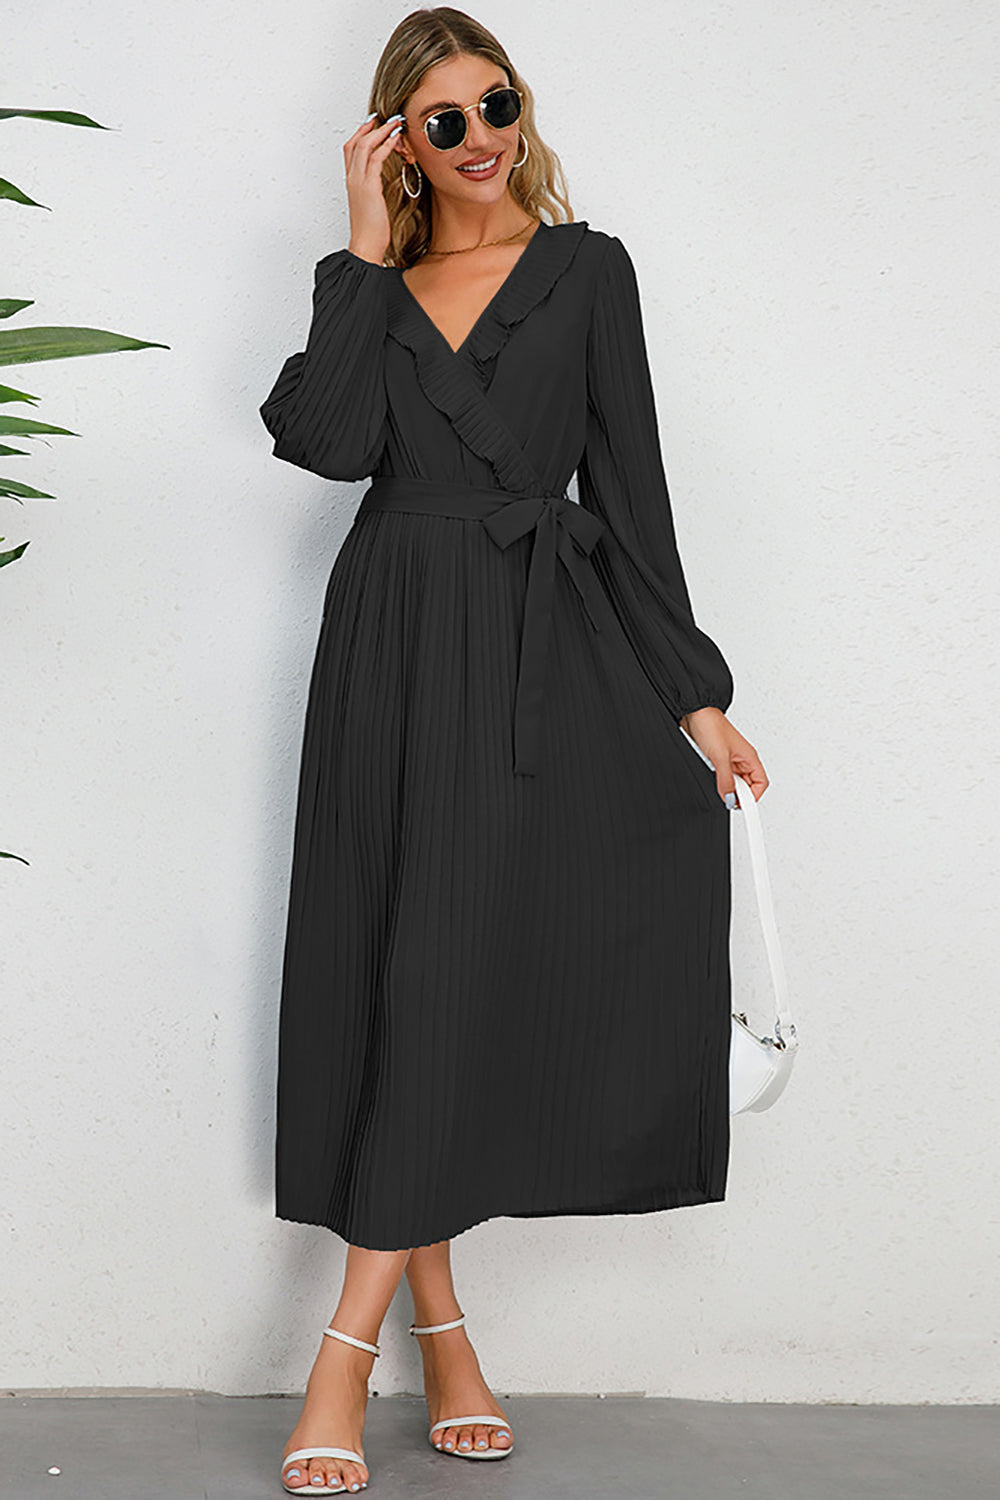 Long Sleeves Black Casual Dress with Ruffles